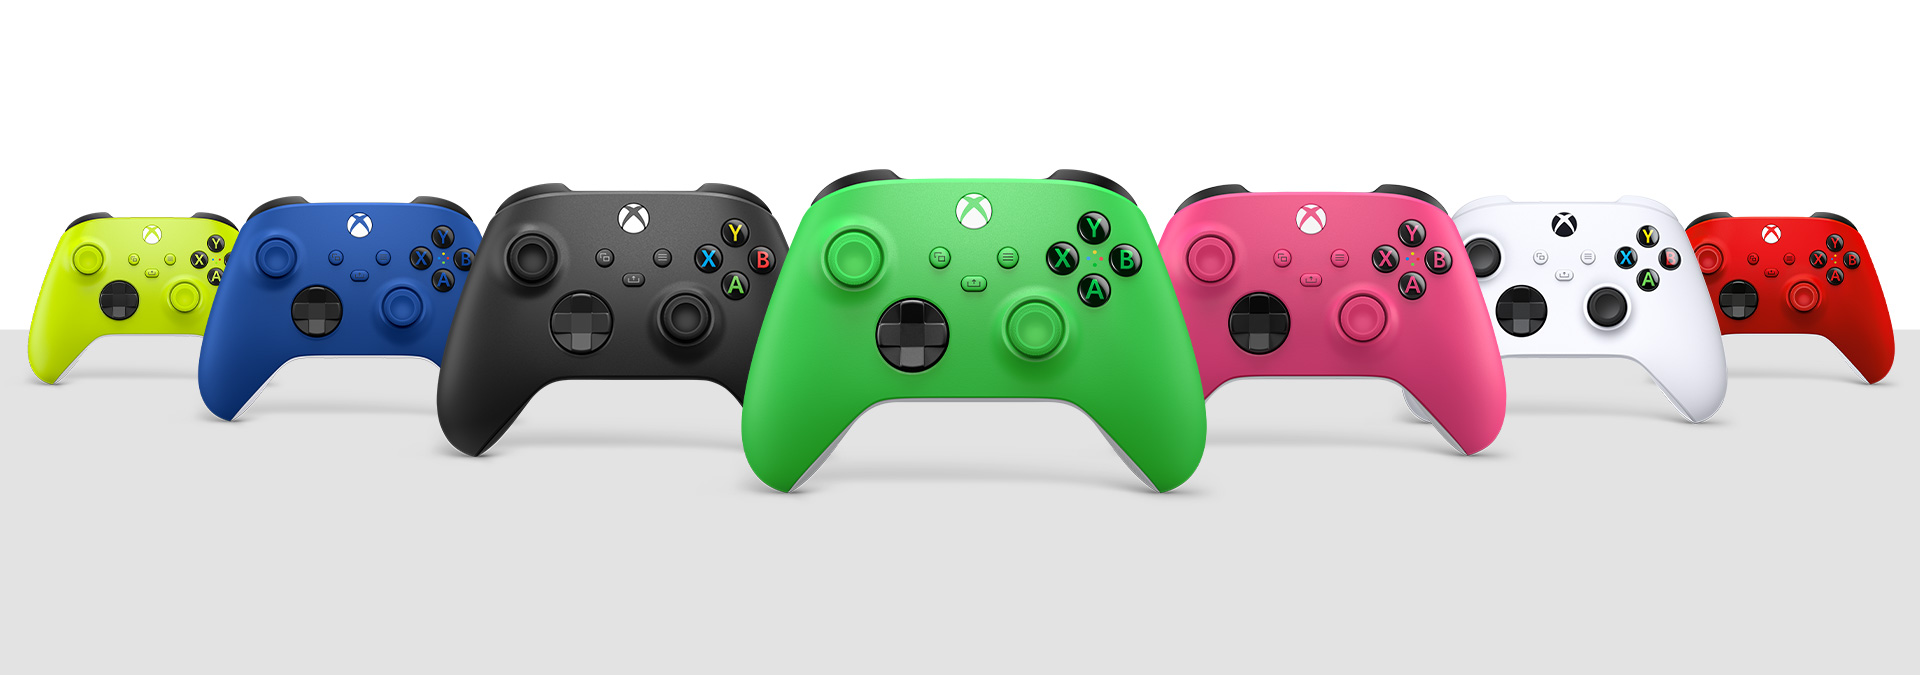 Xbox Wireless Controllers in Electric Volt,  Shock Blue, Carbon Black, Green, Deep Pink, Robot White, and Pulse Red